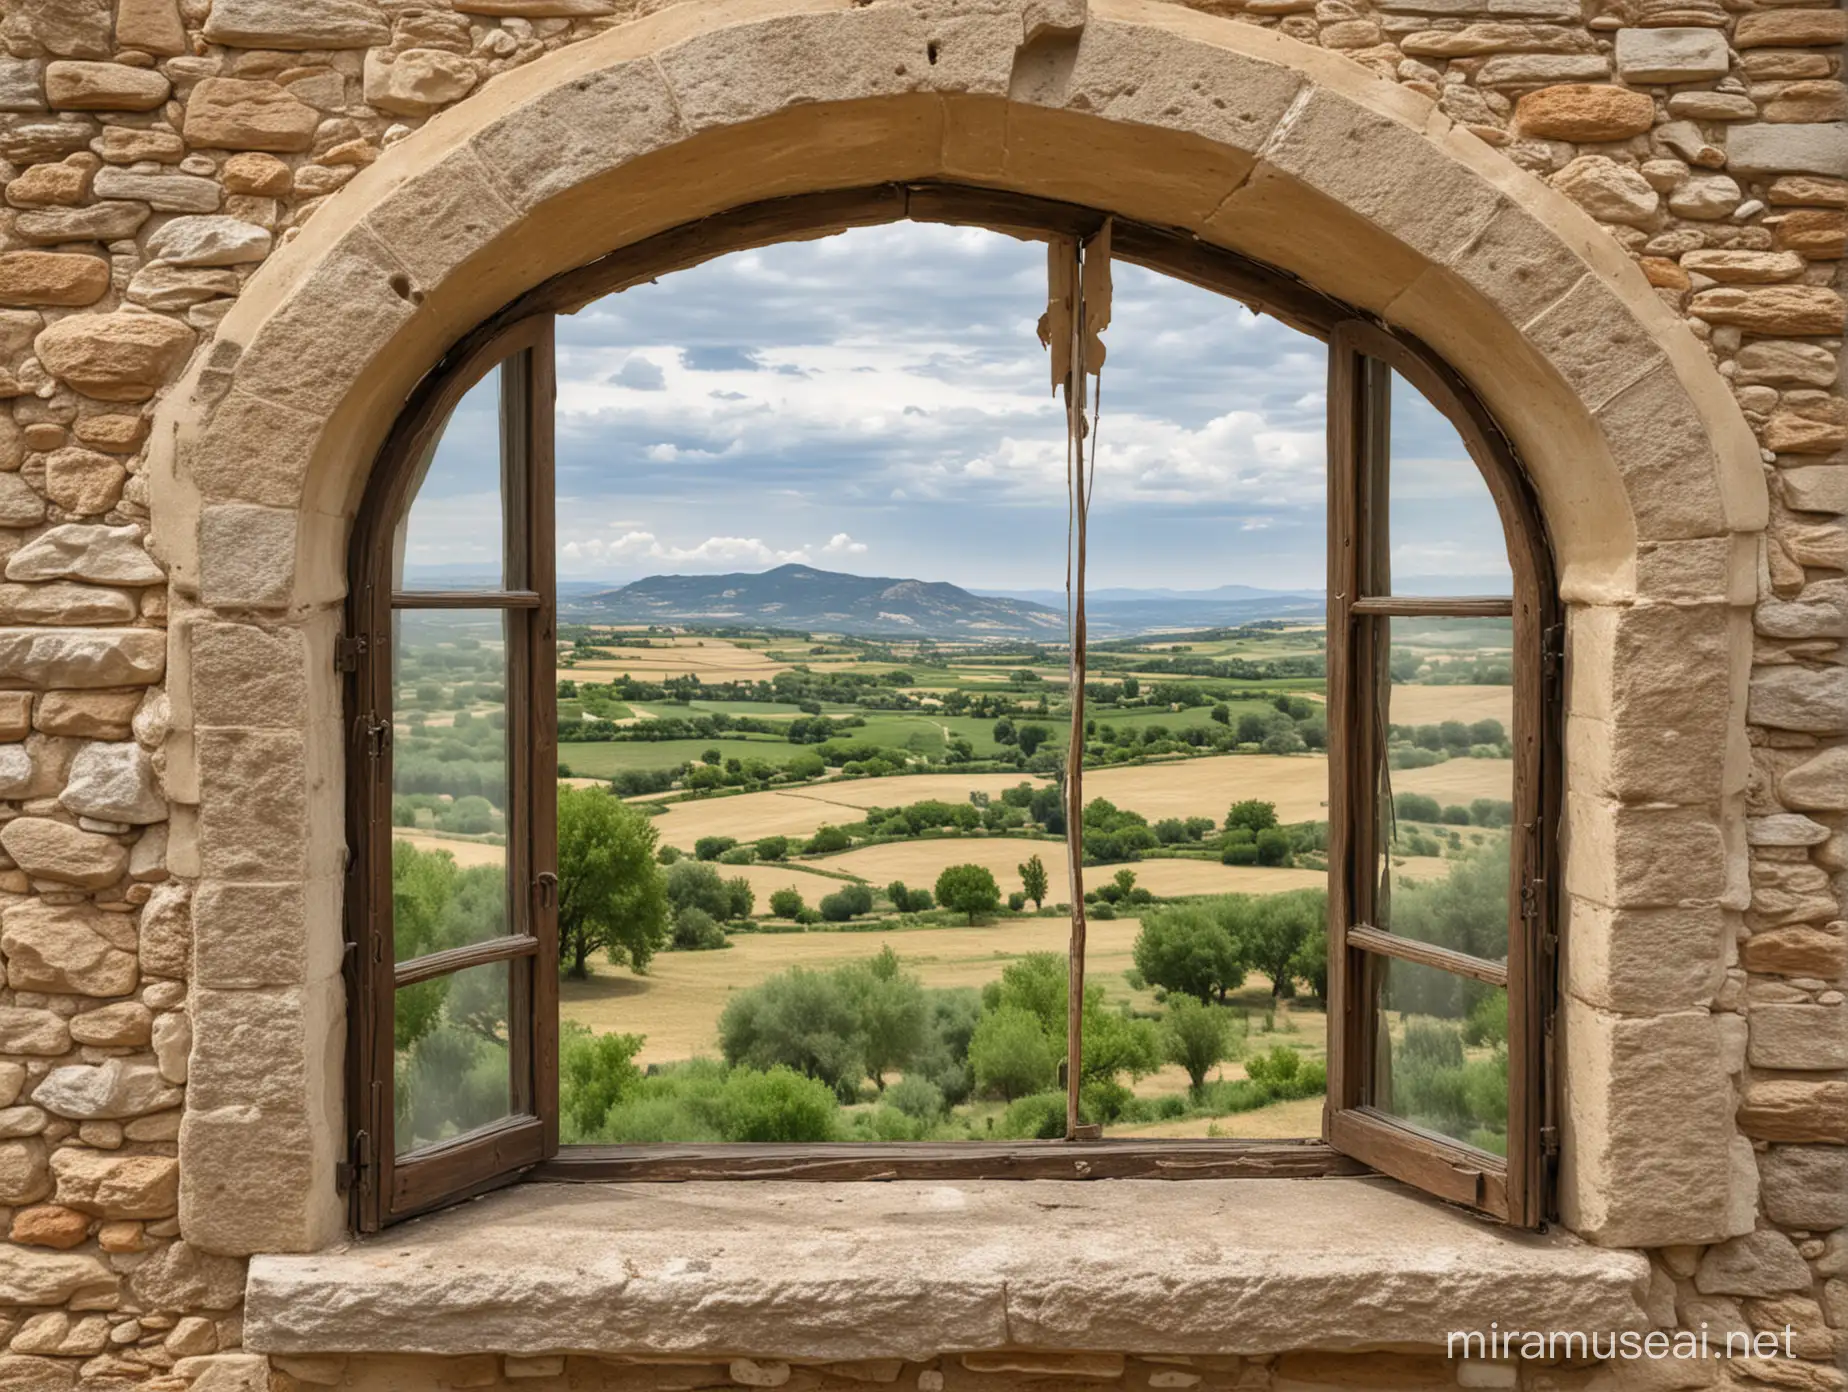 15th Century French Chateau Window Overlooking Provence Landscape